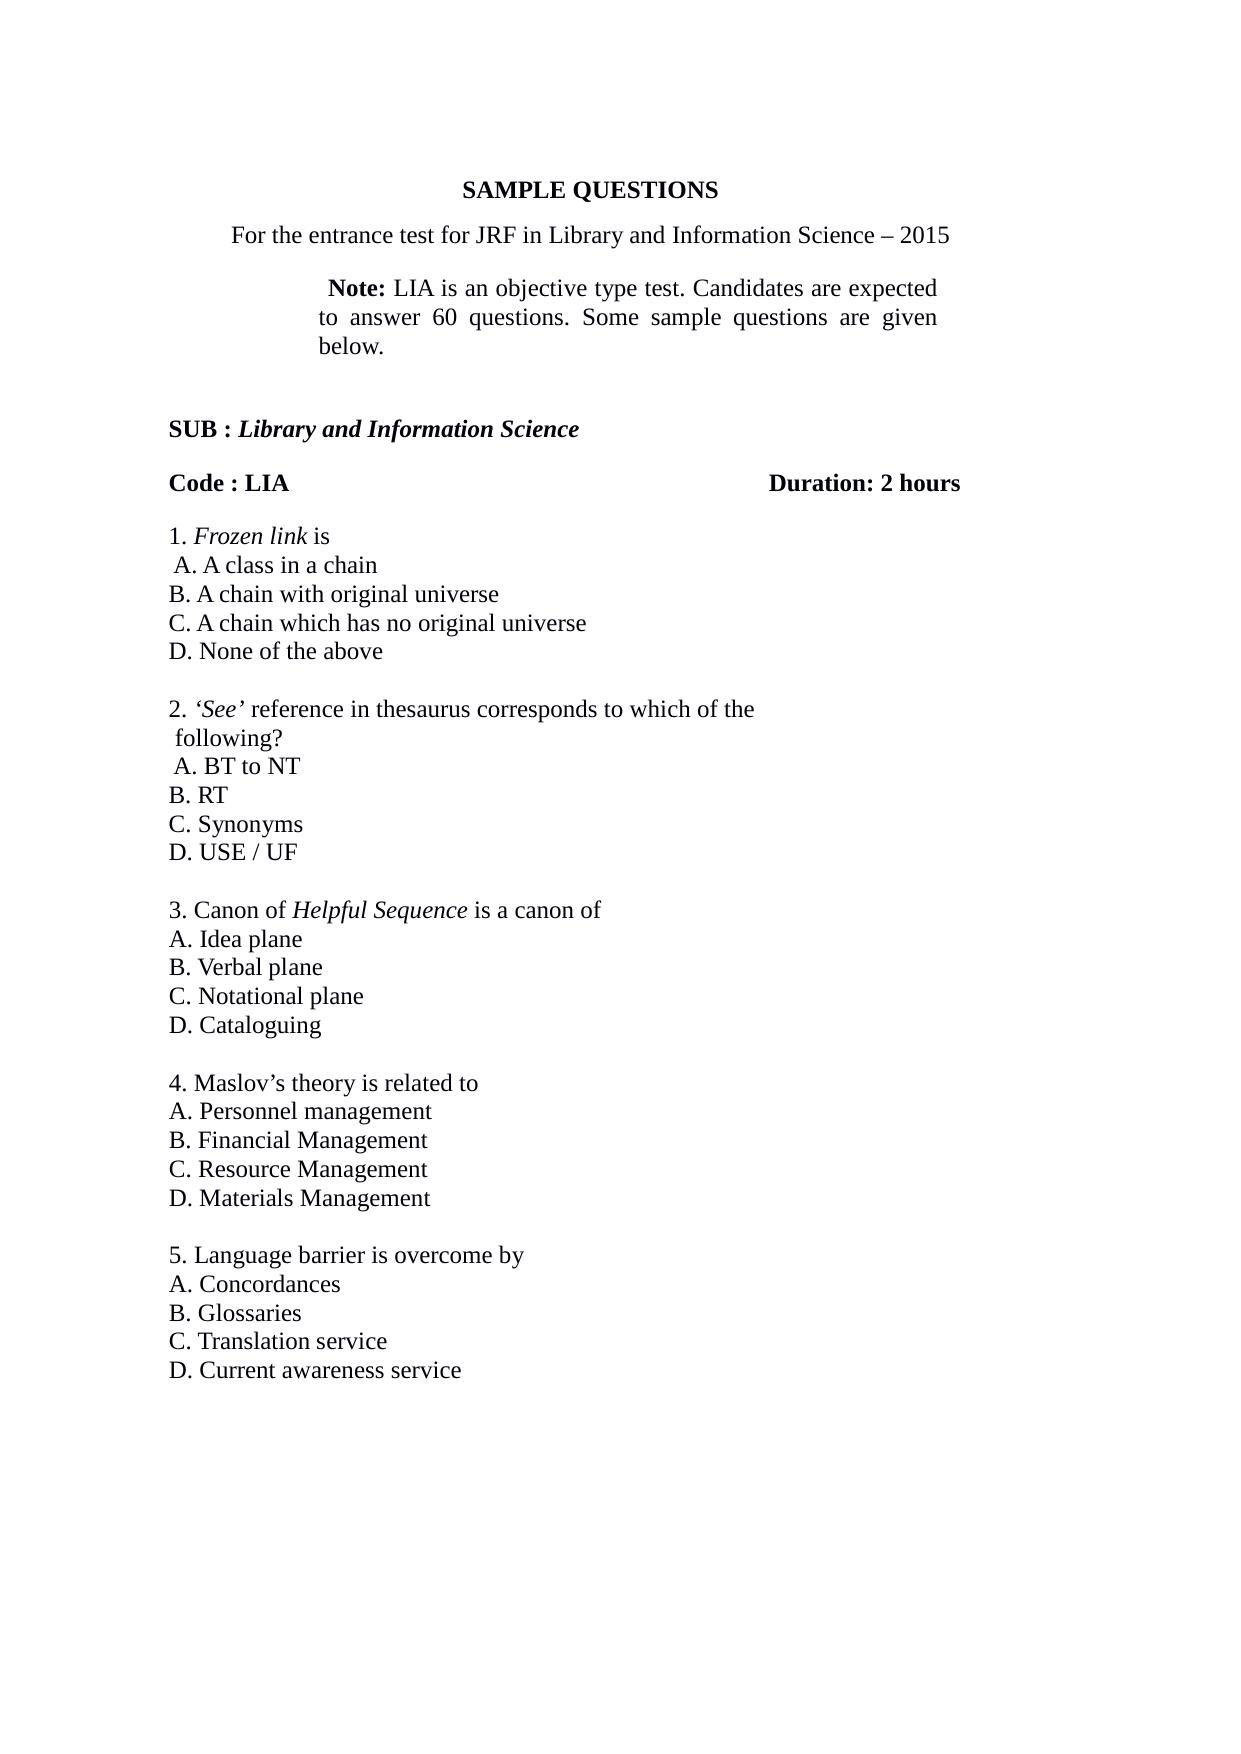 ISI Admission Test JRF in Library and Information Science LIB 2015 Sample Paper - Page 1